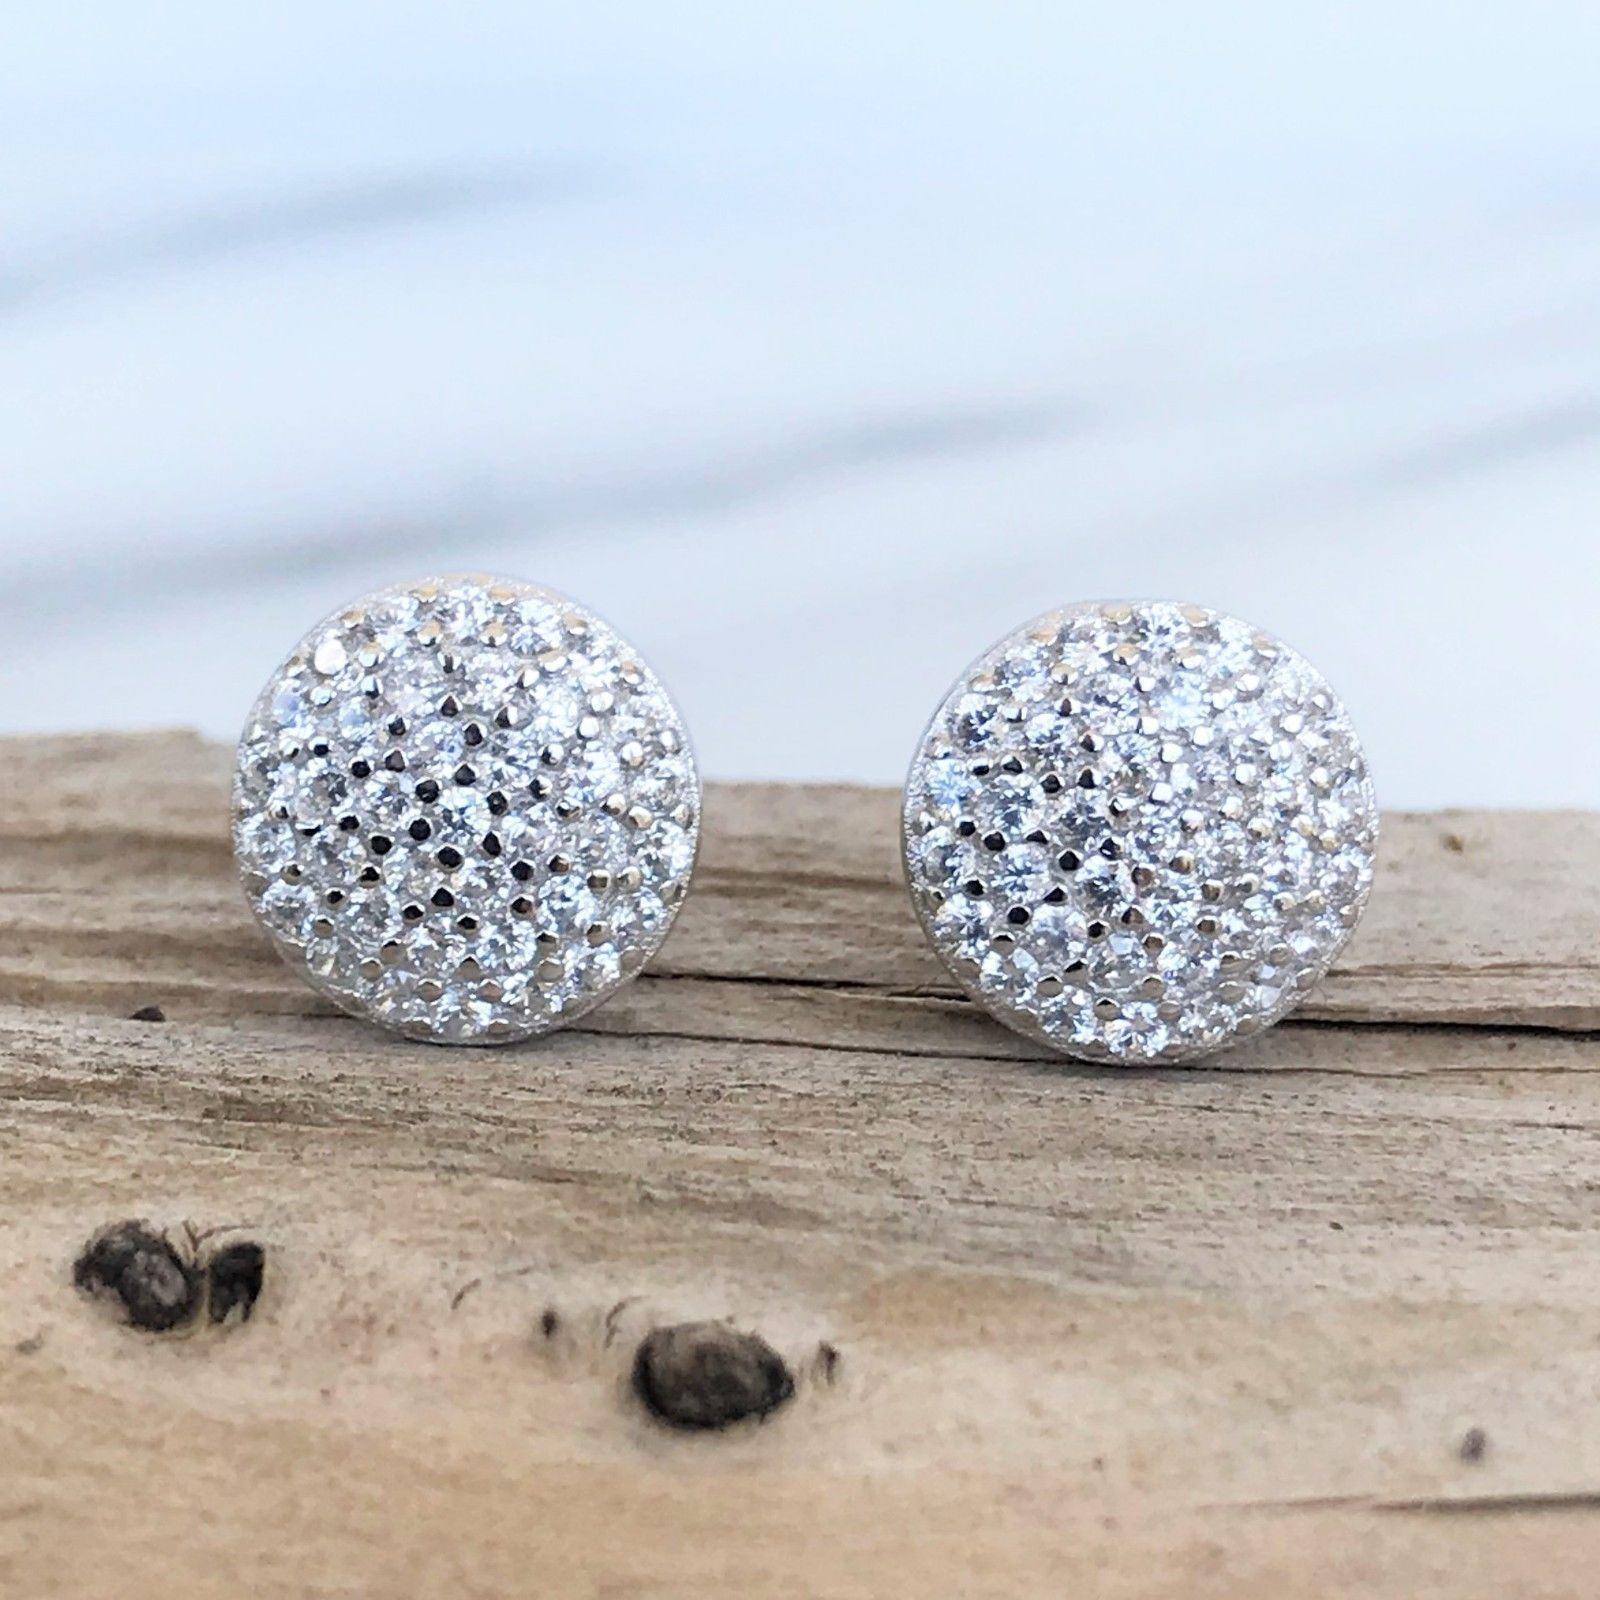 Sterling Silver Bridal Wedding 9mm Round Flat Disc CZ Pave Stud Earrings - STERLING SILVER DESIGNS